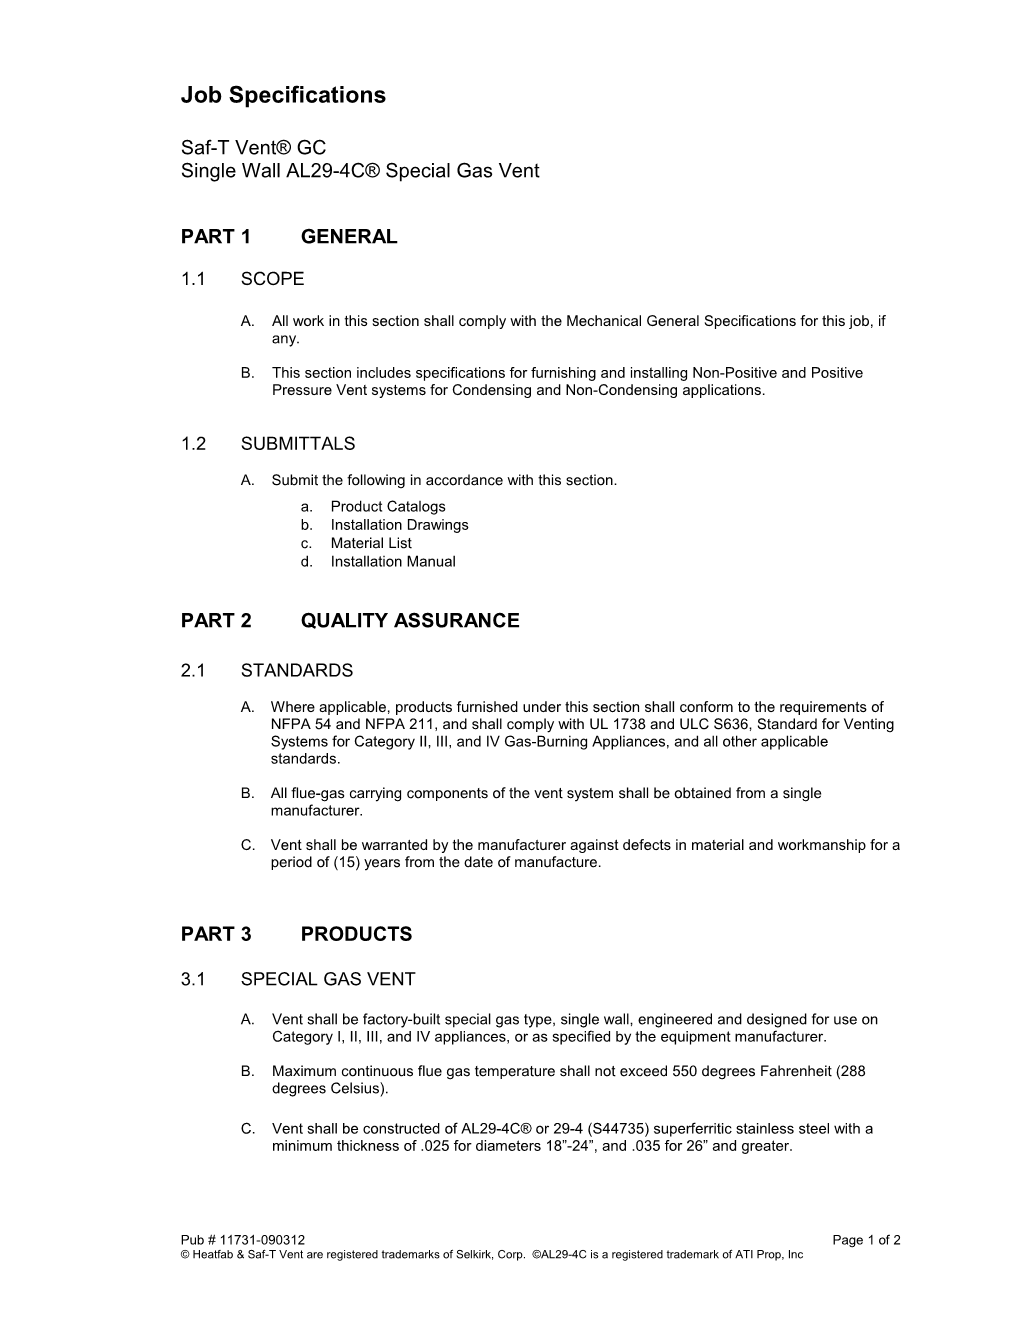 GC - Specification Sheet